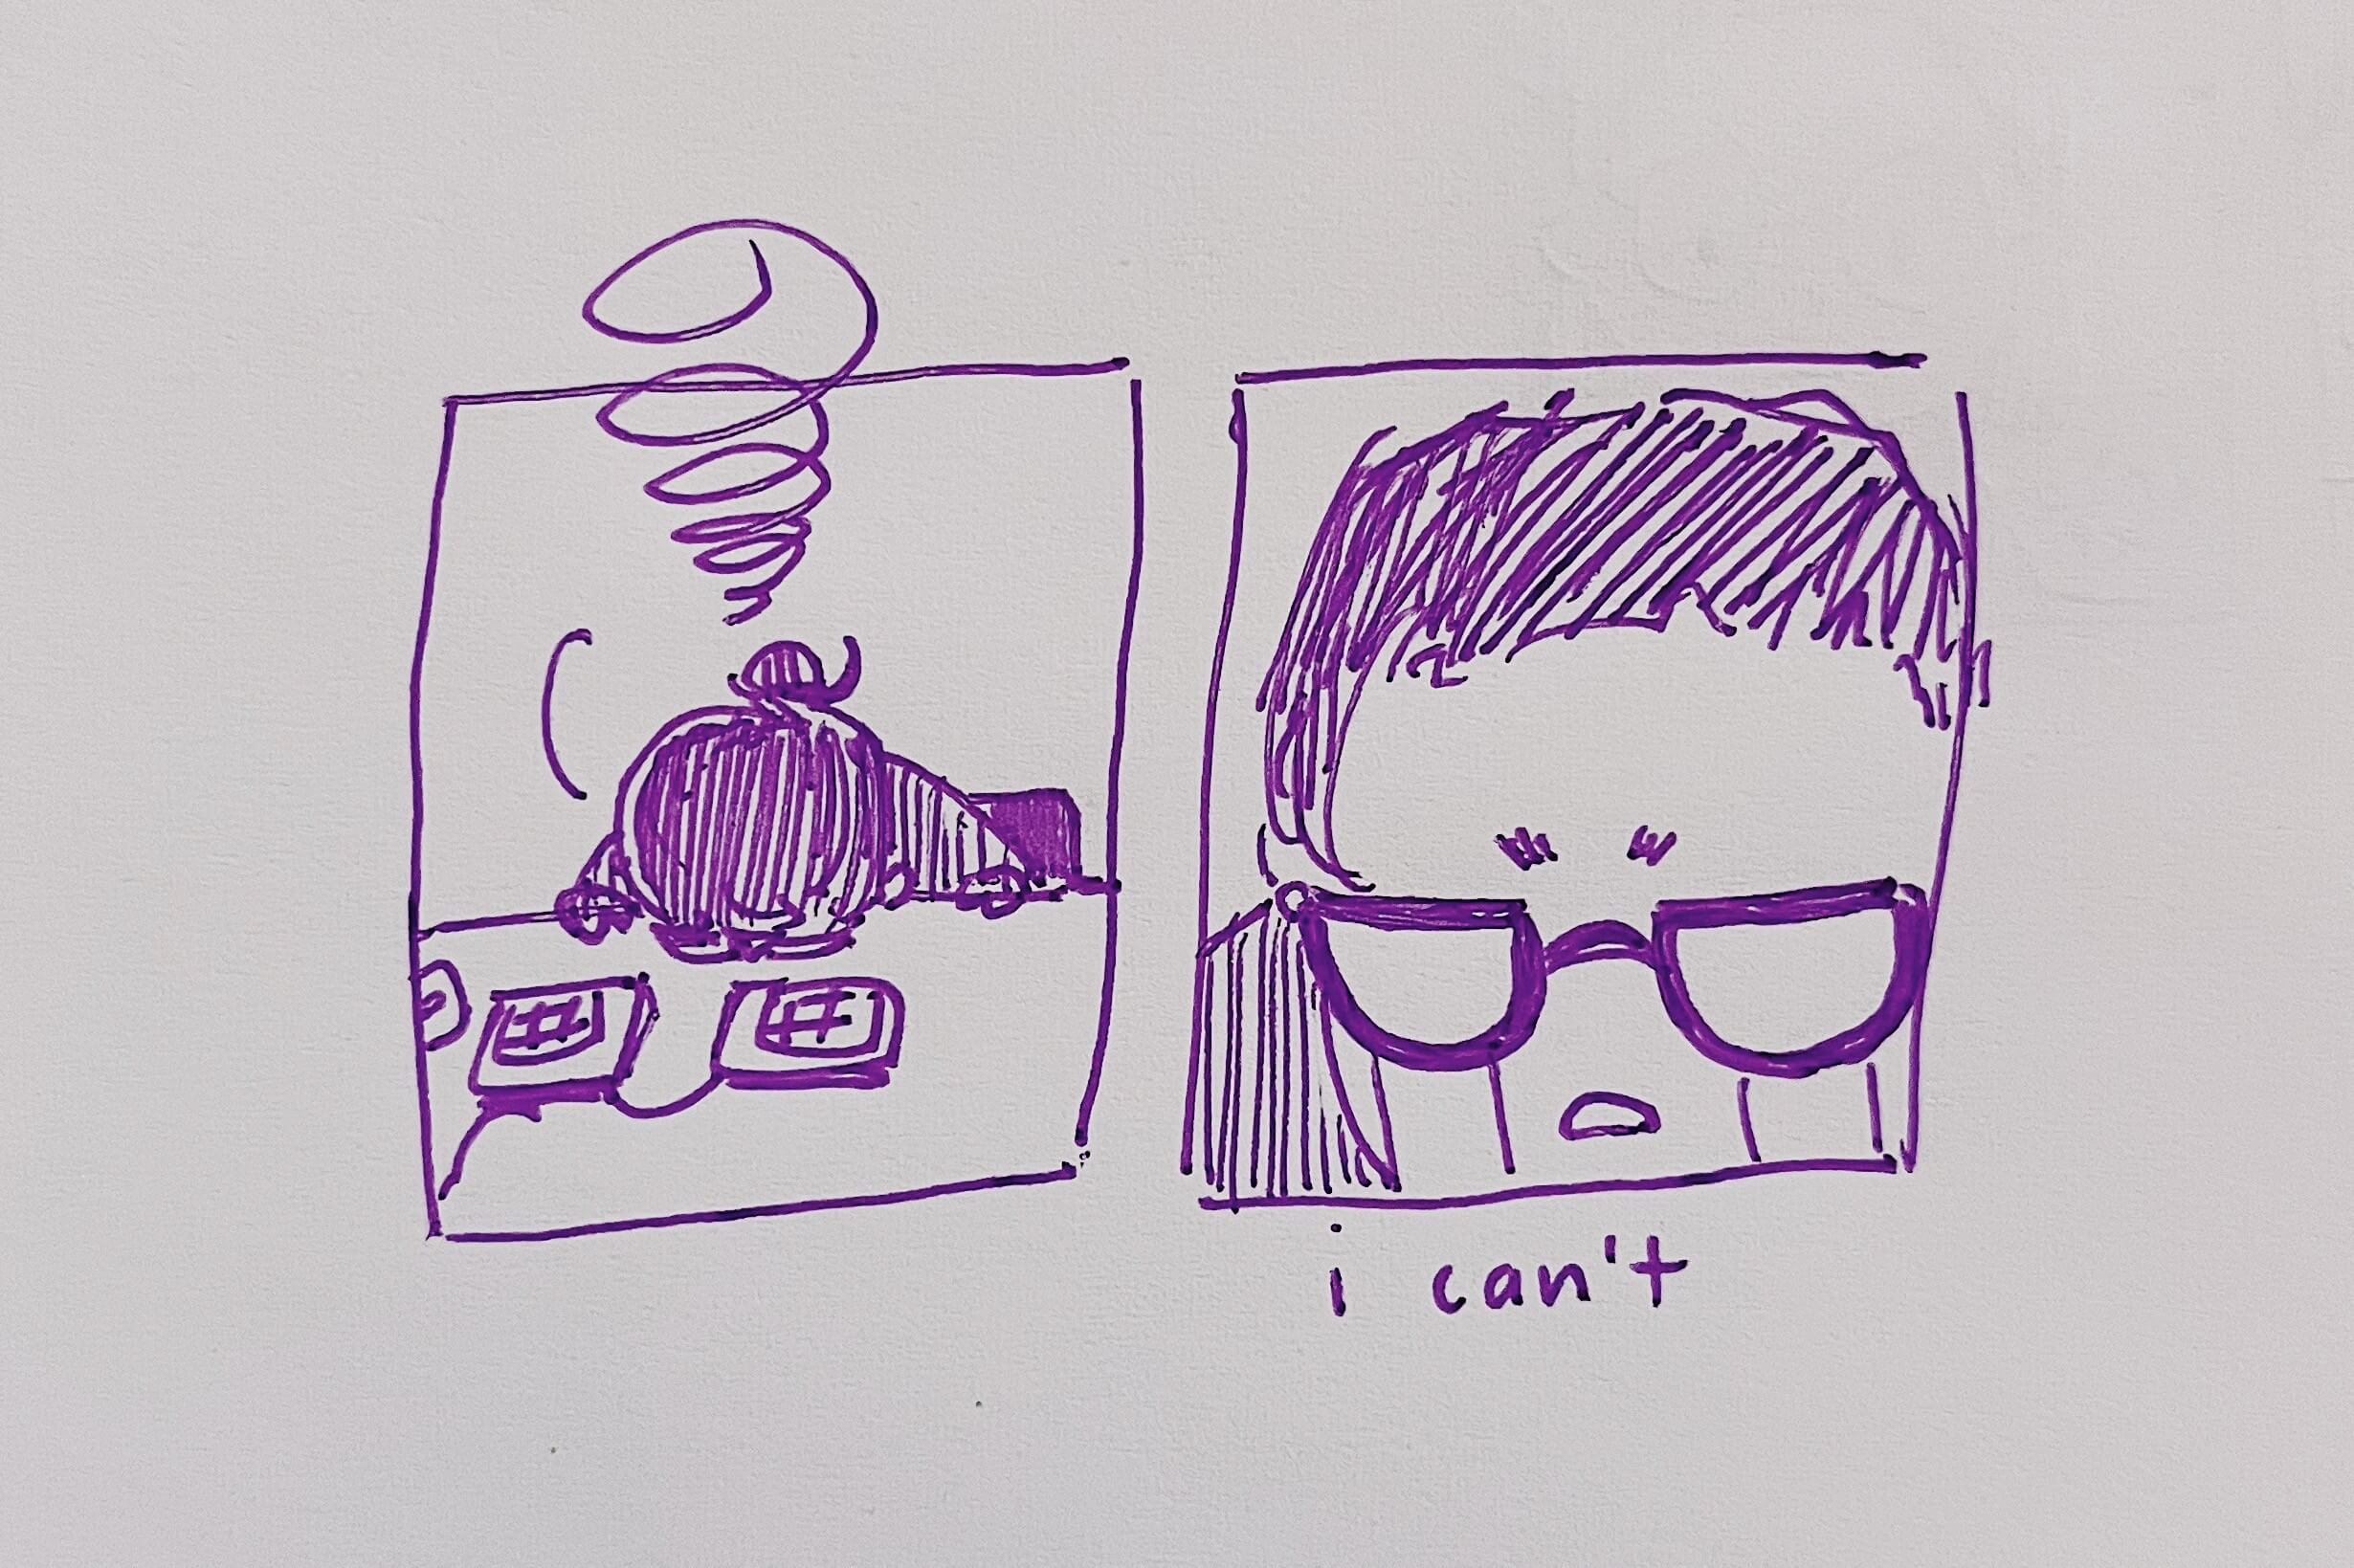 Two panel comic, drawn in purple ink. 1) Me hunched over, face on my desk, in a pose of defeat. 2) Close up of me stone-faced and crying, with the caption ‘I can’t’.